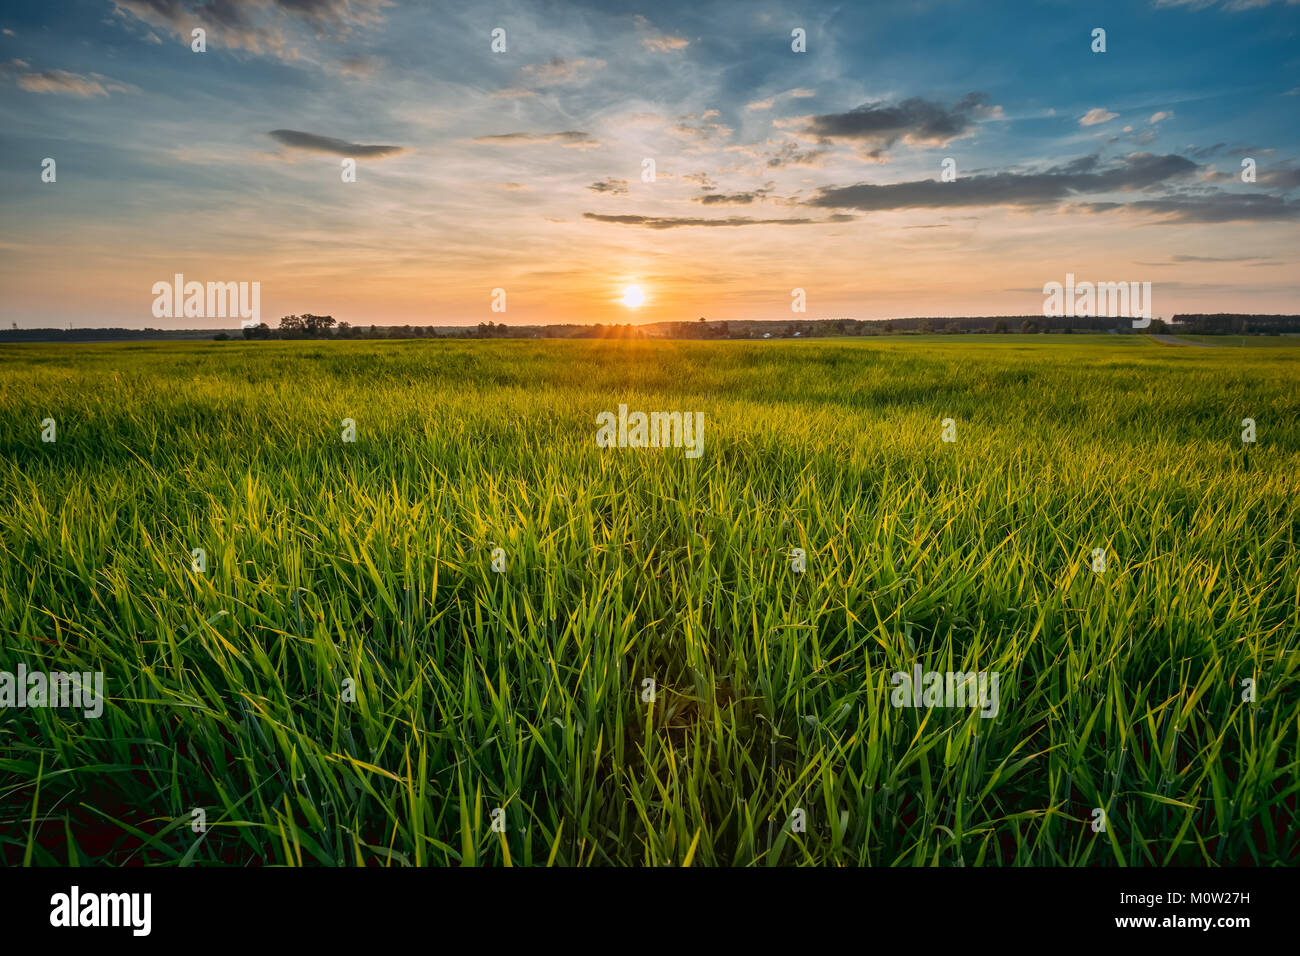 Spring Sun Shining Over Agricultural Landscape Of Green Wheat Field. Scenic Summer Colorful Dramatic Sky In Sunset Dawn Sunrise. Skyline. Stock Photo